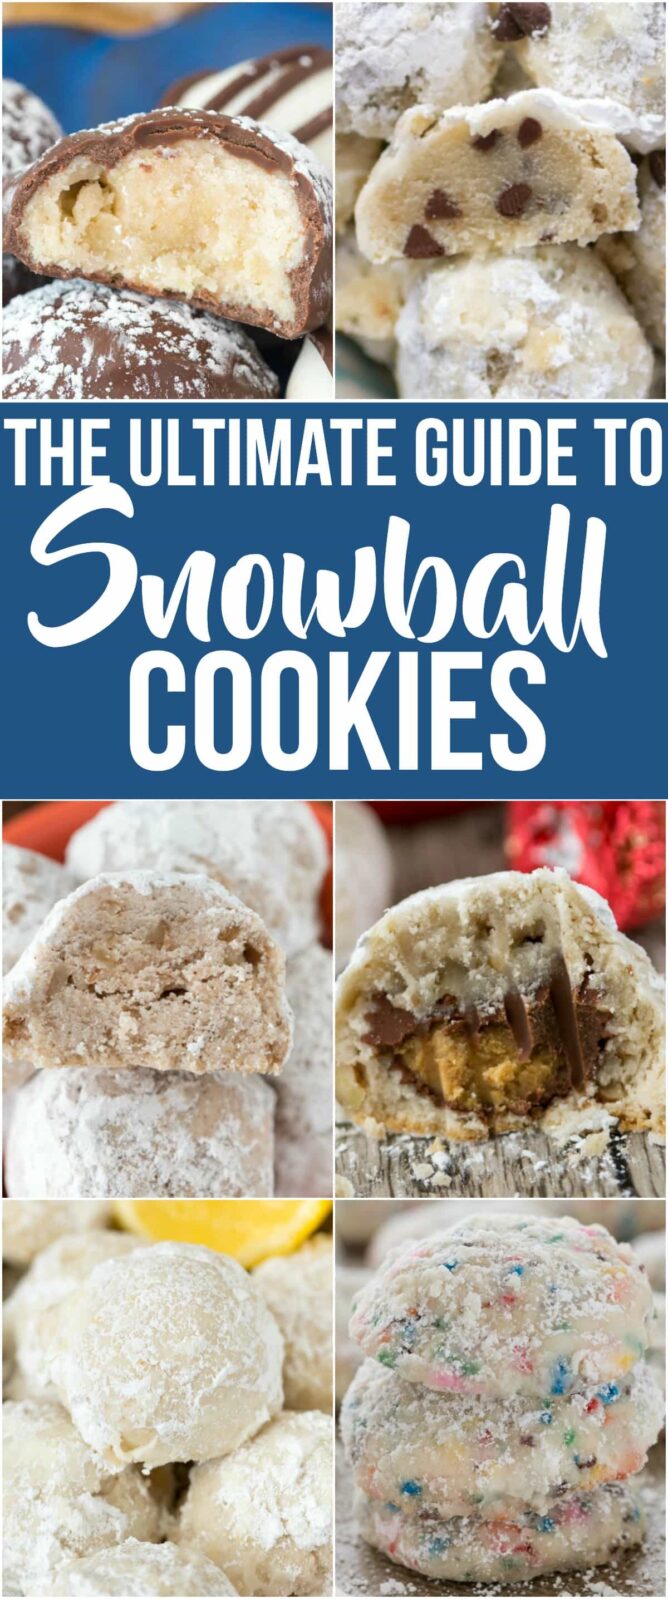 Collage of snowball cookies